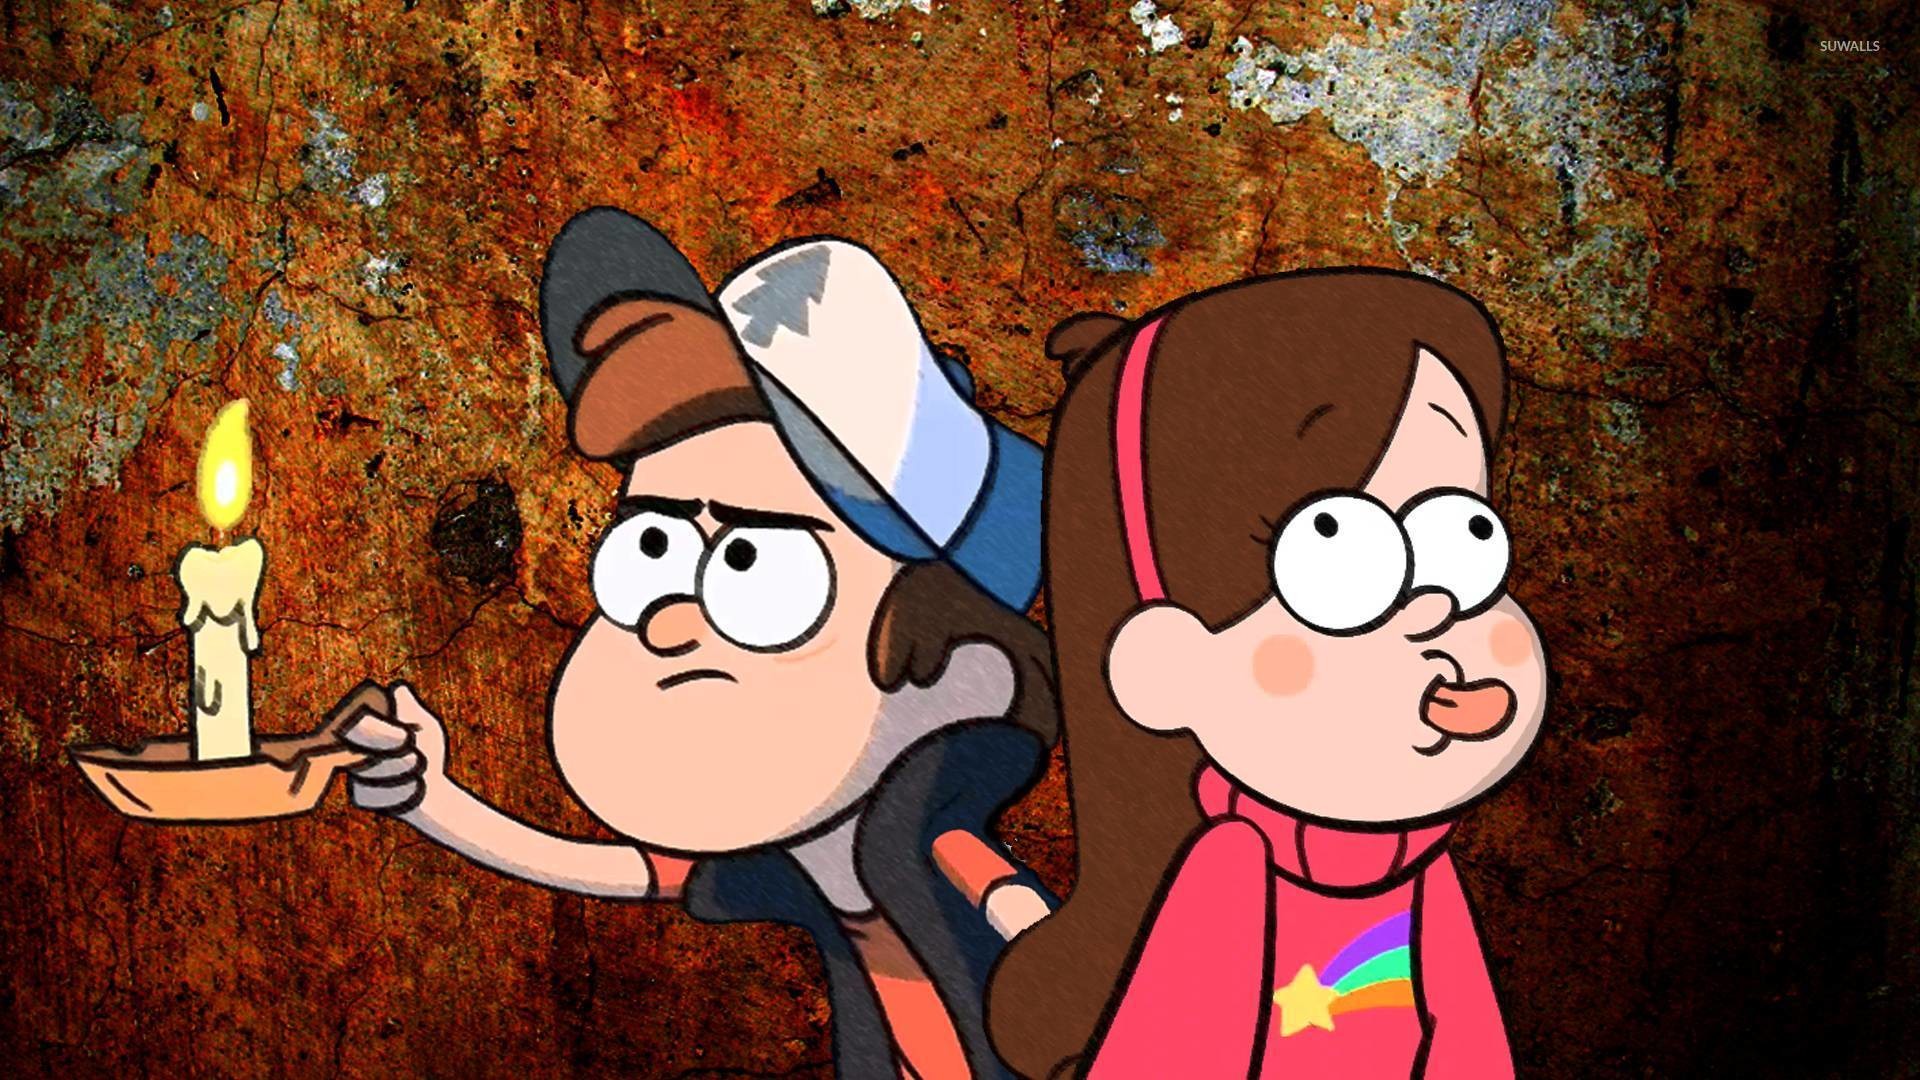 1920x1080 Dipper and Mabel from Gravity Falls by atticuslover12 on DeviantArt